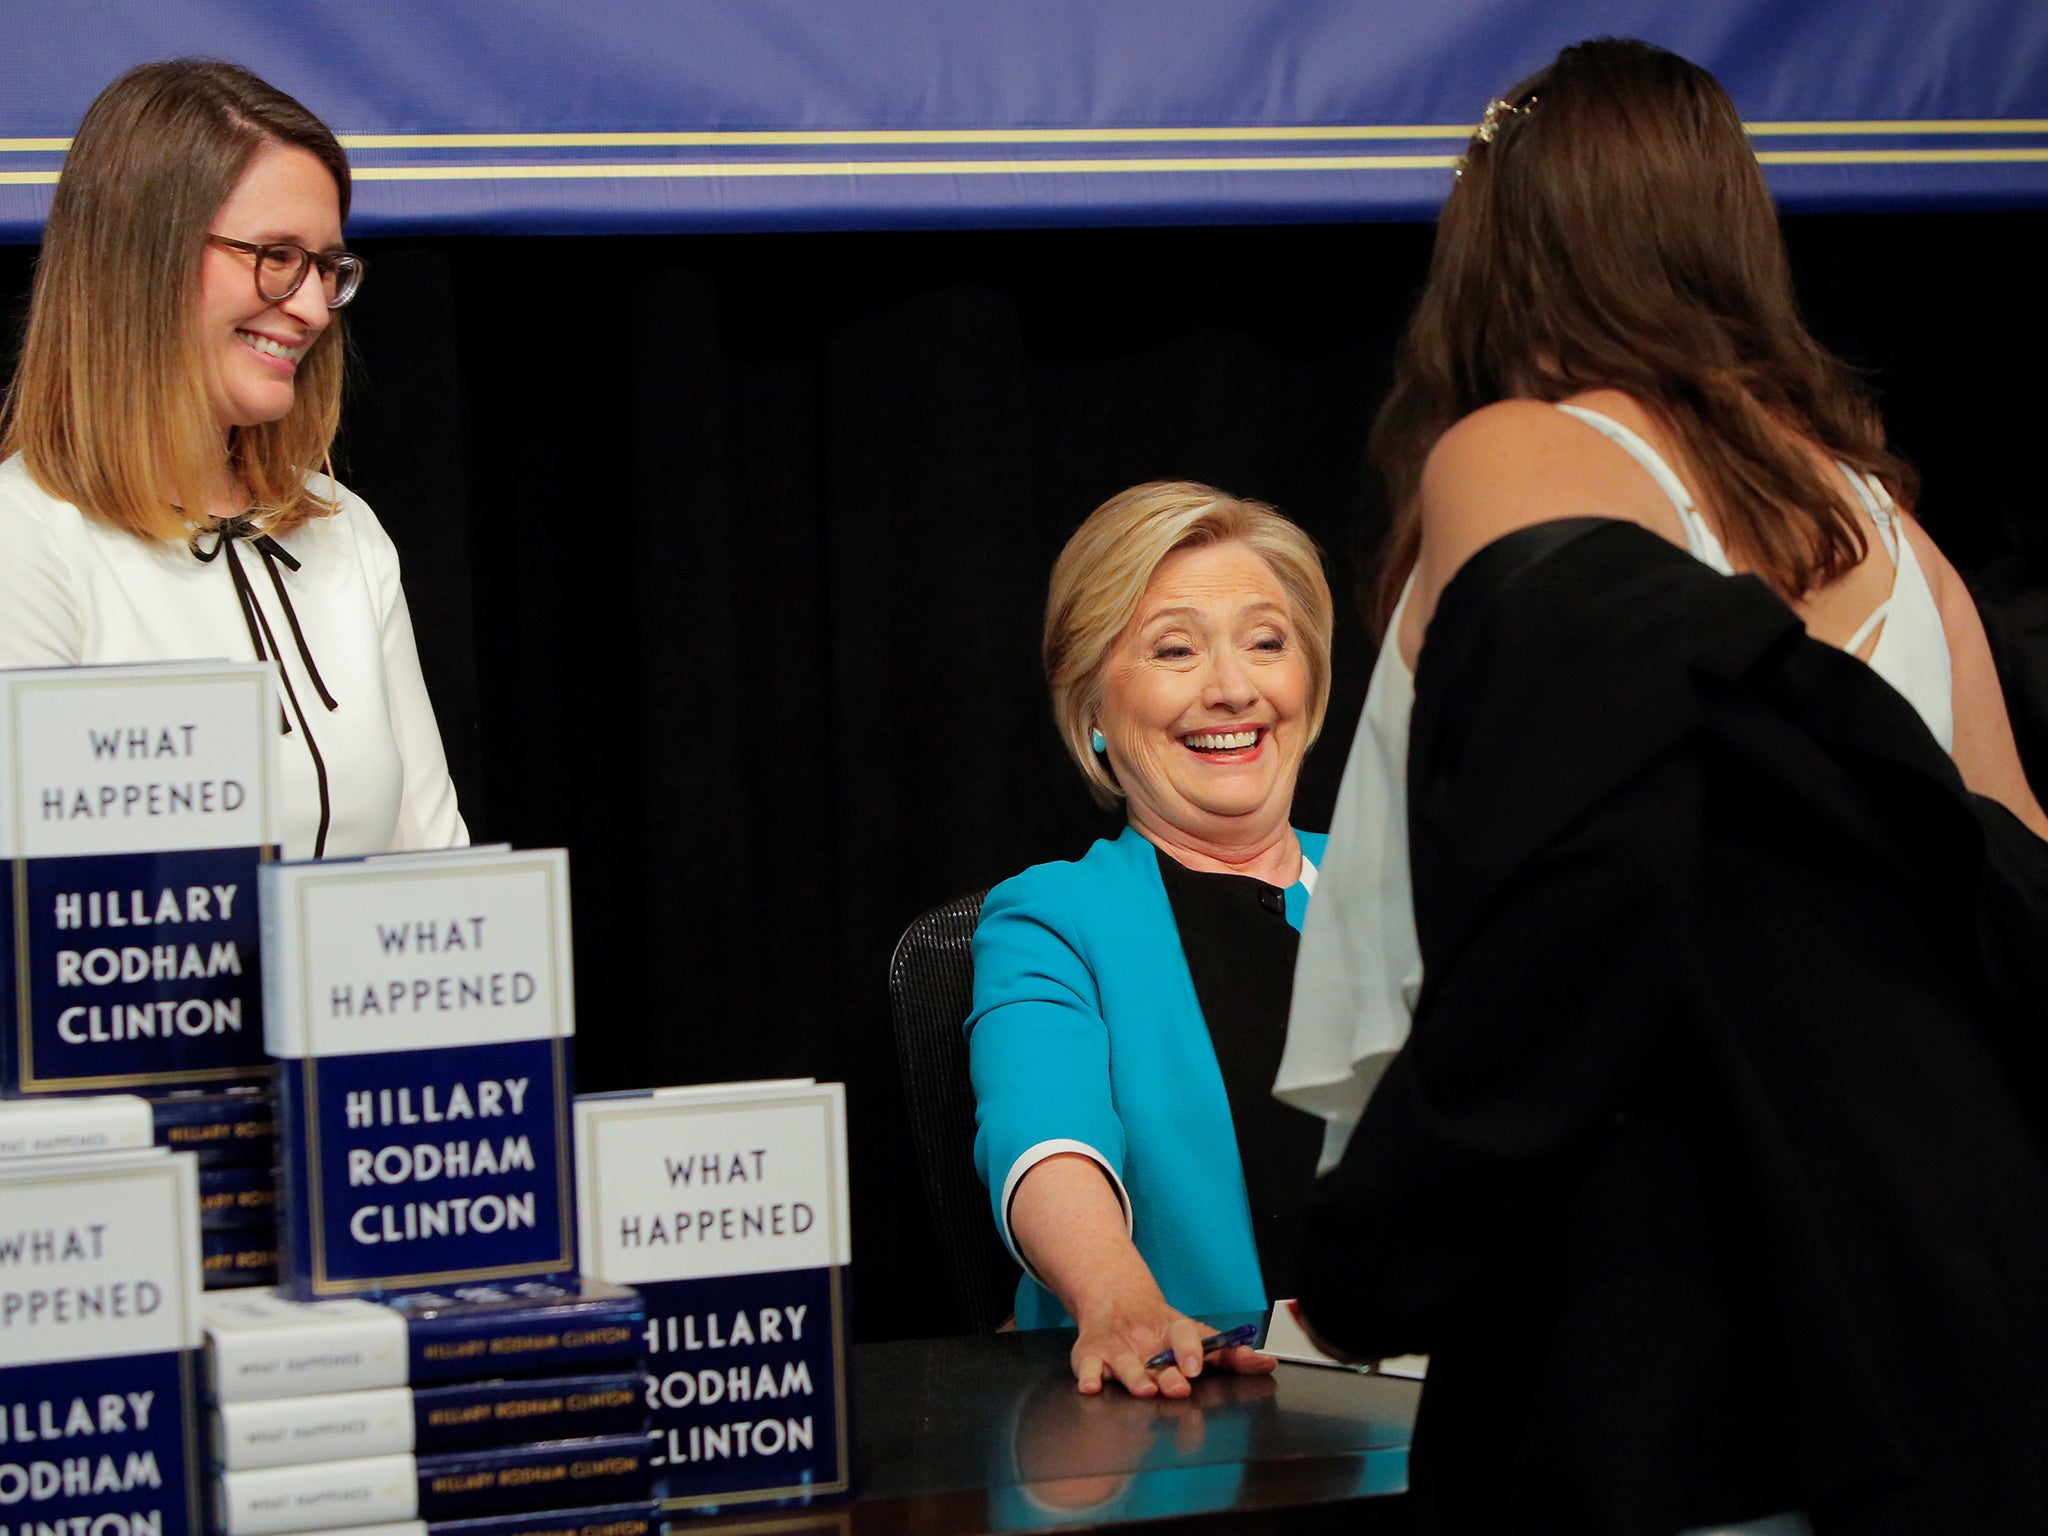 Former Secretary of State Hillary Clinton reacts at a signing of her new book 'What Happened' at Barnes & Noble bookstore at Union Square in Manhattan, New York